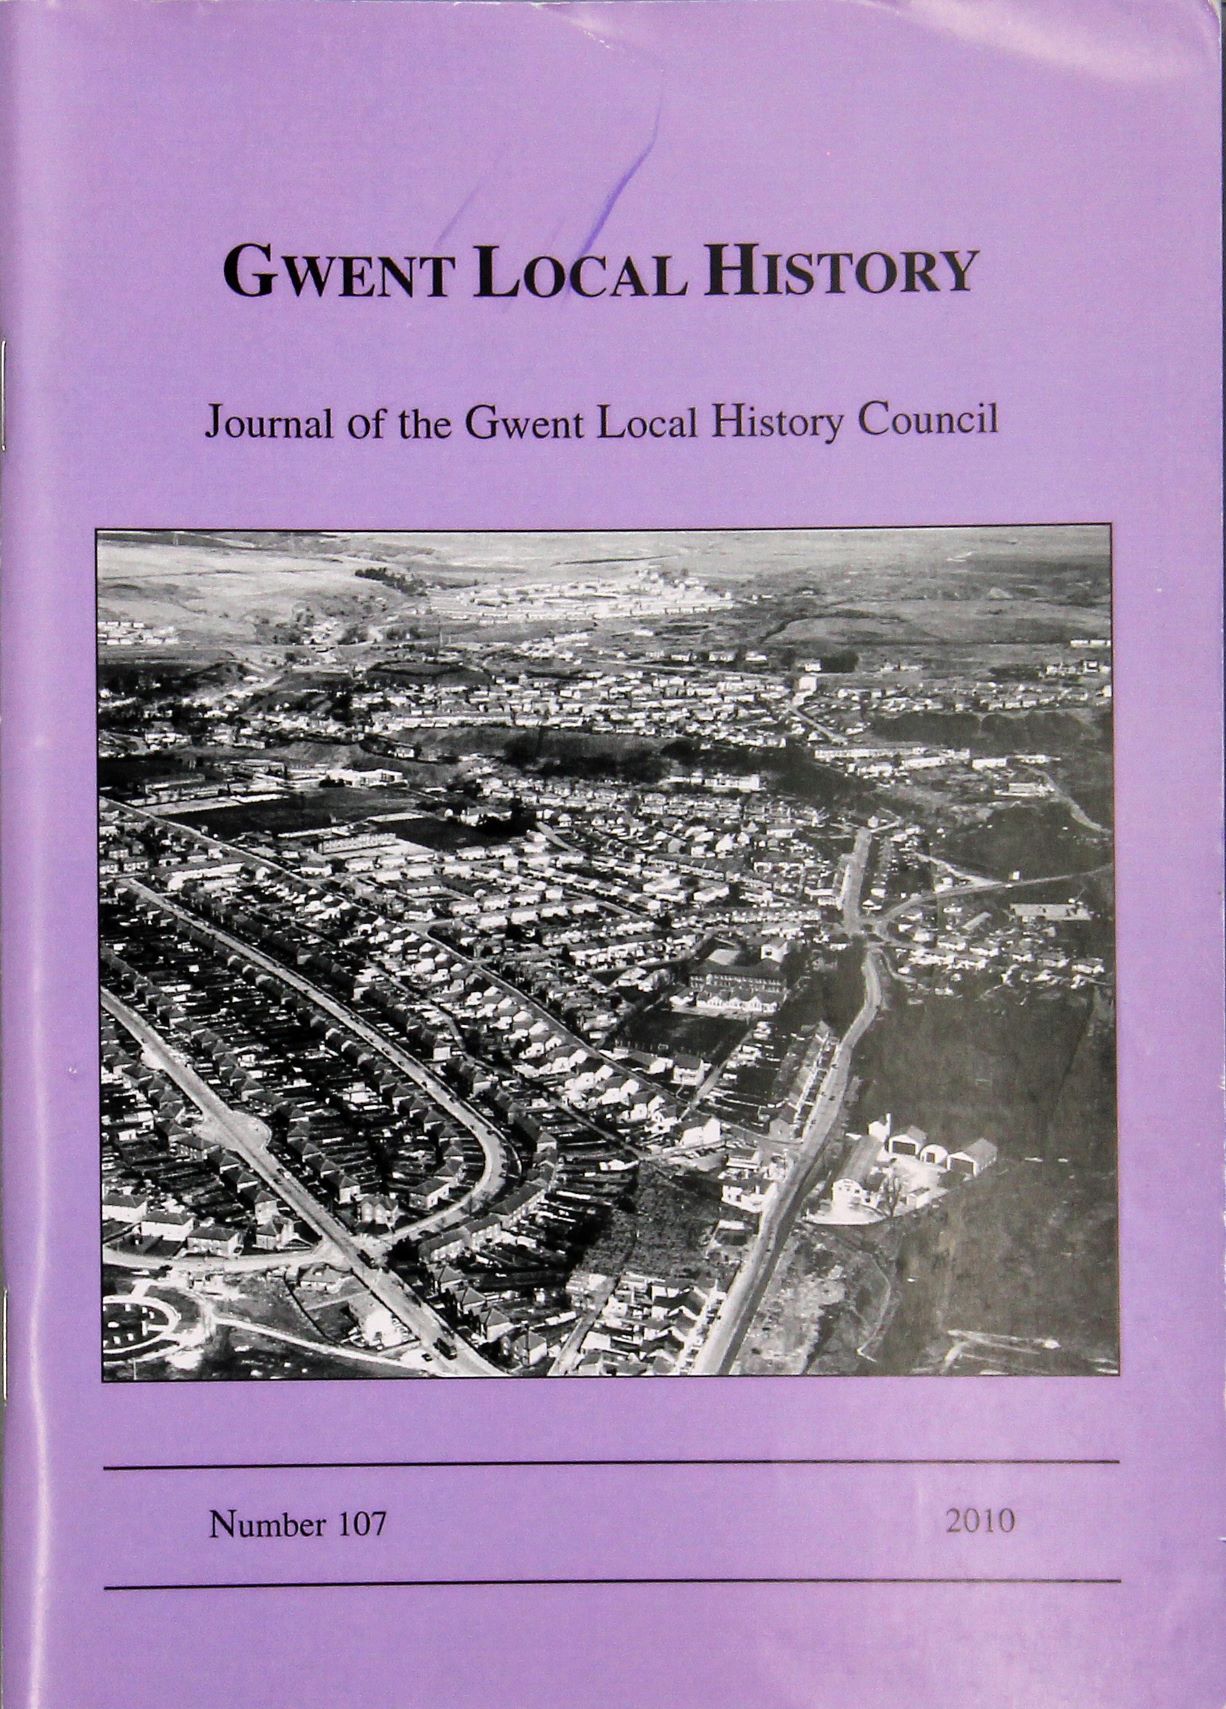 Gwent Local History: Journal of the Gwent Local History Council No.107, 2010, £2.00